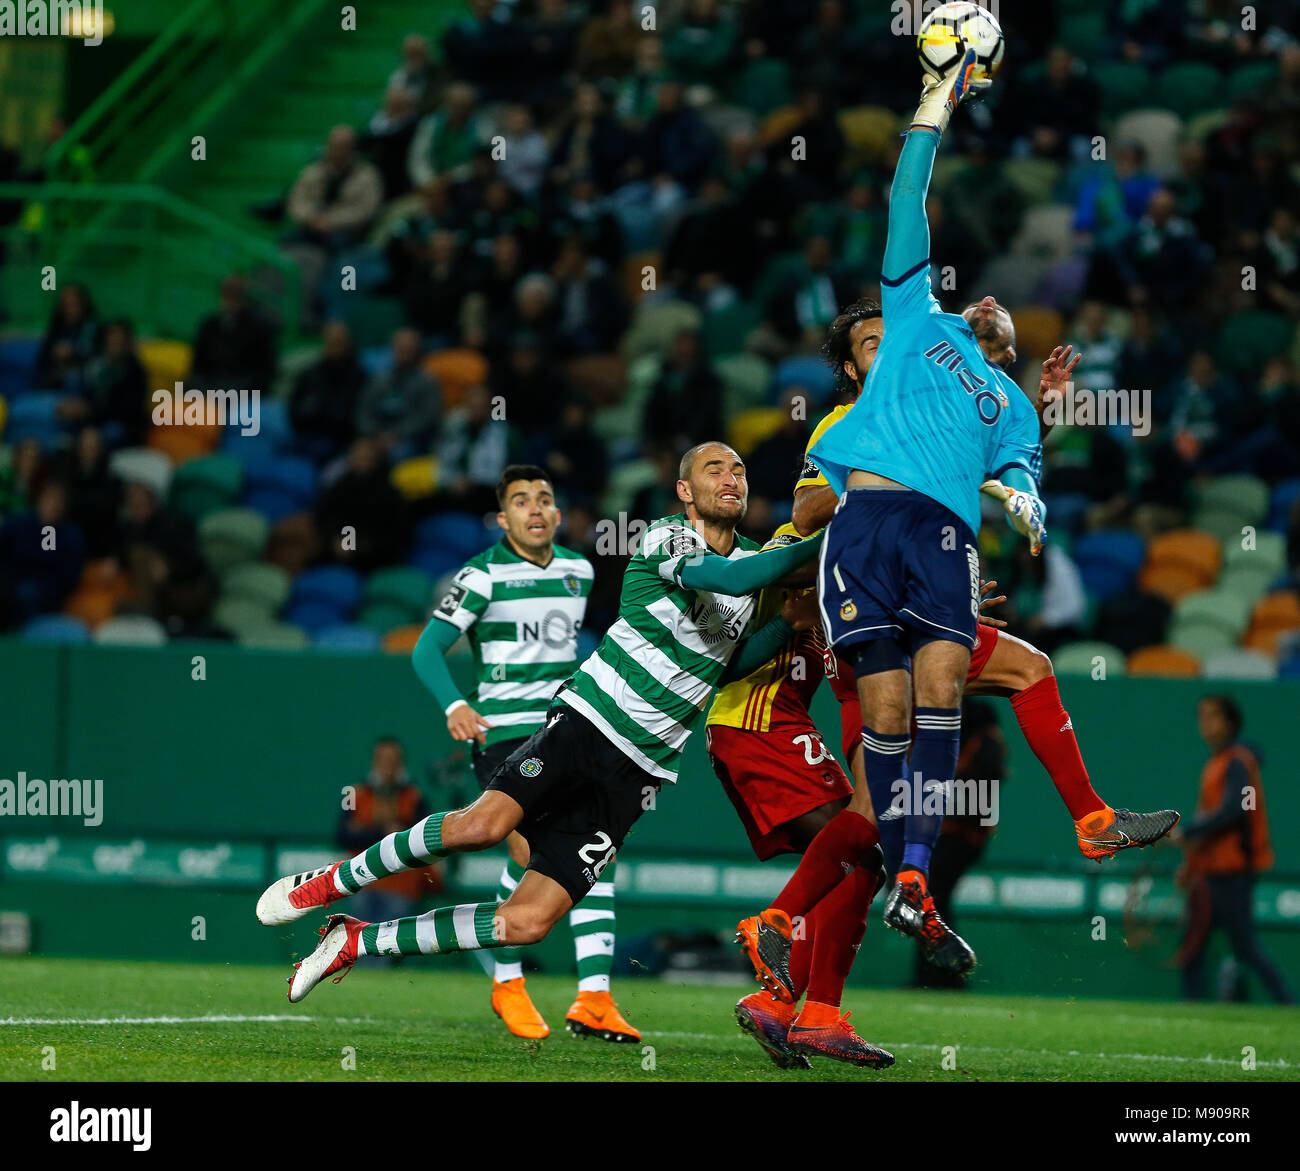 Sporting CP forward Bas Dost during Premier League 2017/18 at Alvalade Stadium in Lisbon on March 16, 2018 Stock Photo